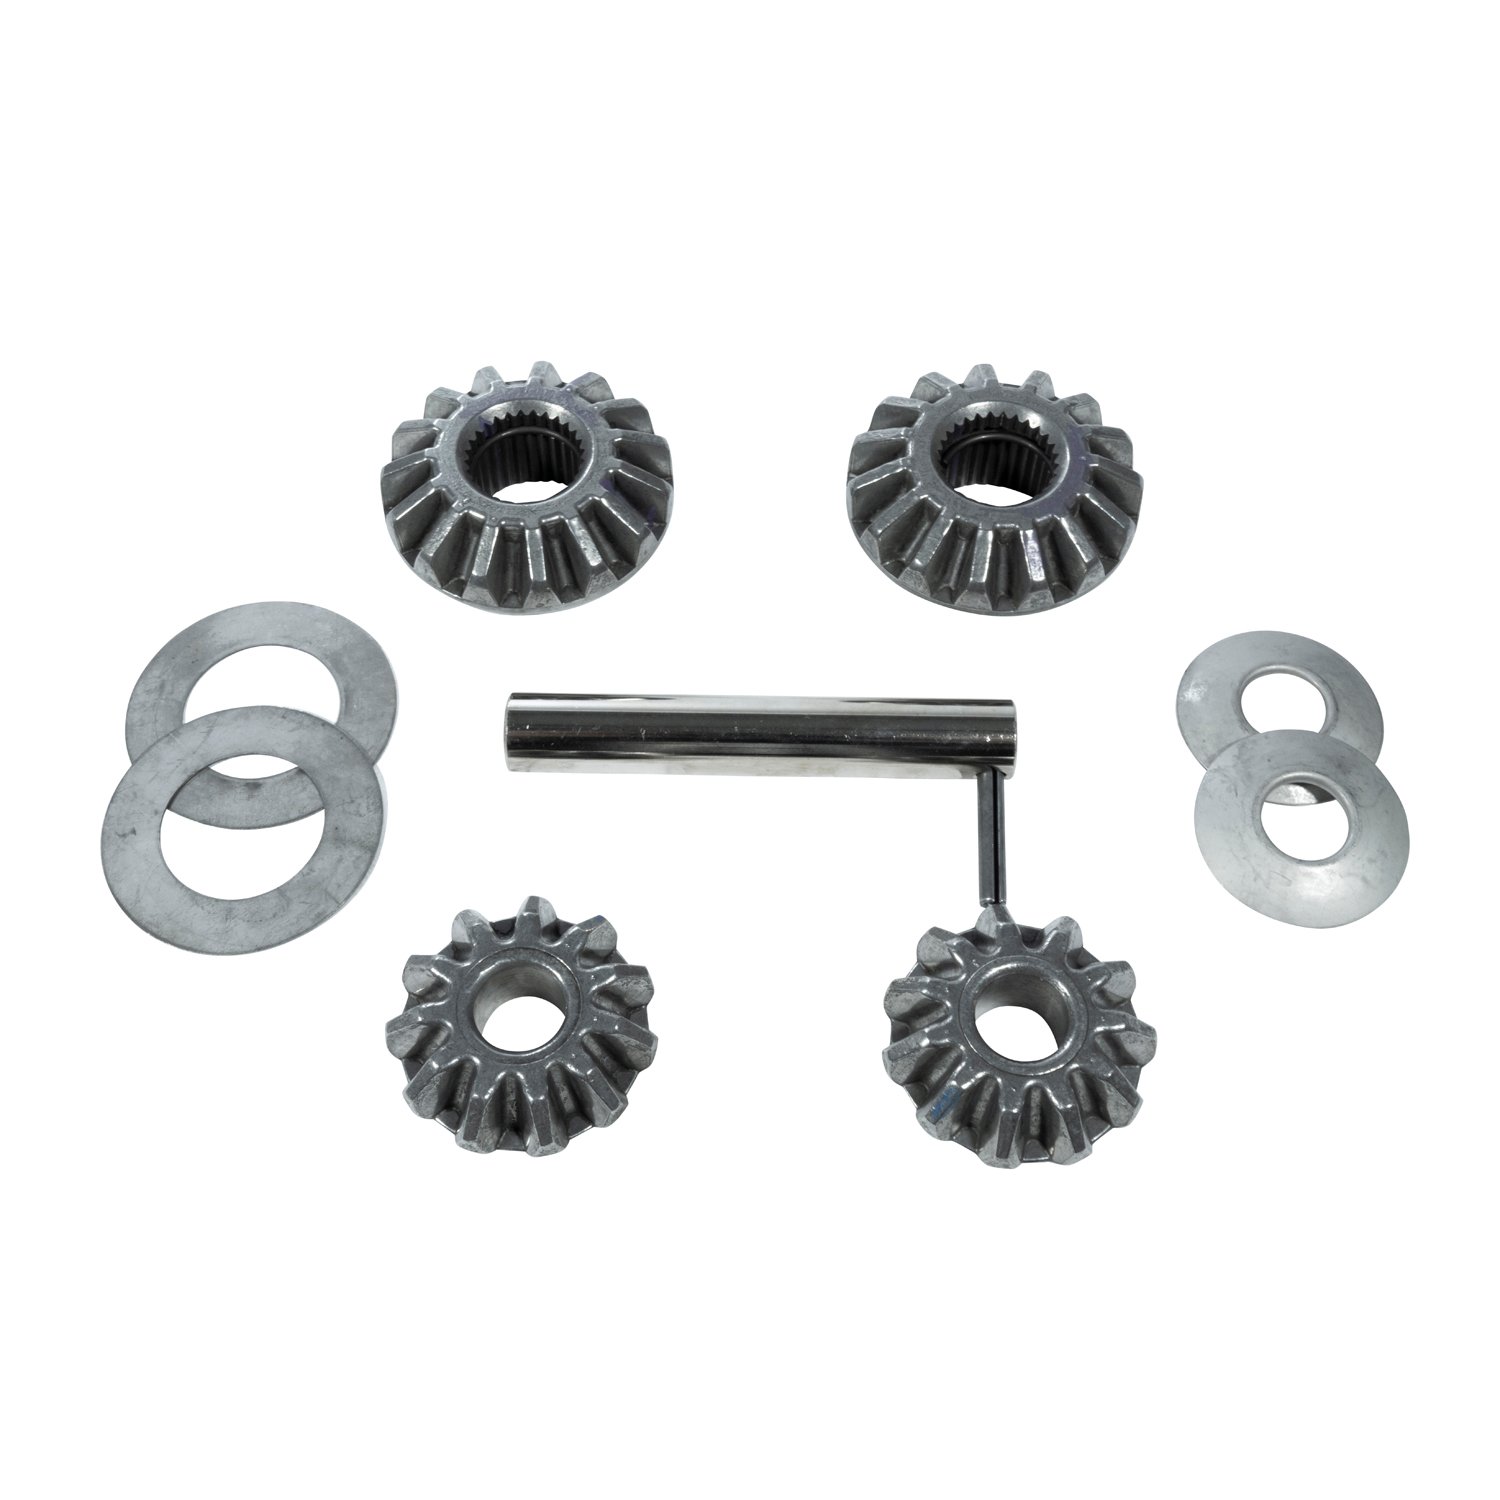 USA Standard 39038 Open Spider Gear Set, GM 8.25 in. Ifs And 28 Spline, For 4Wd And Awd